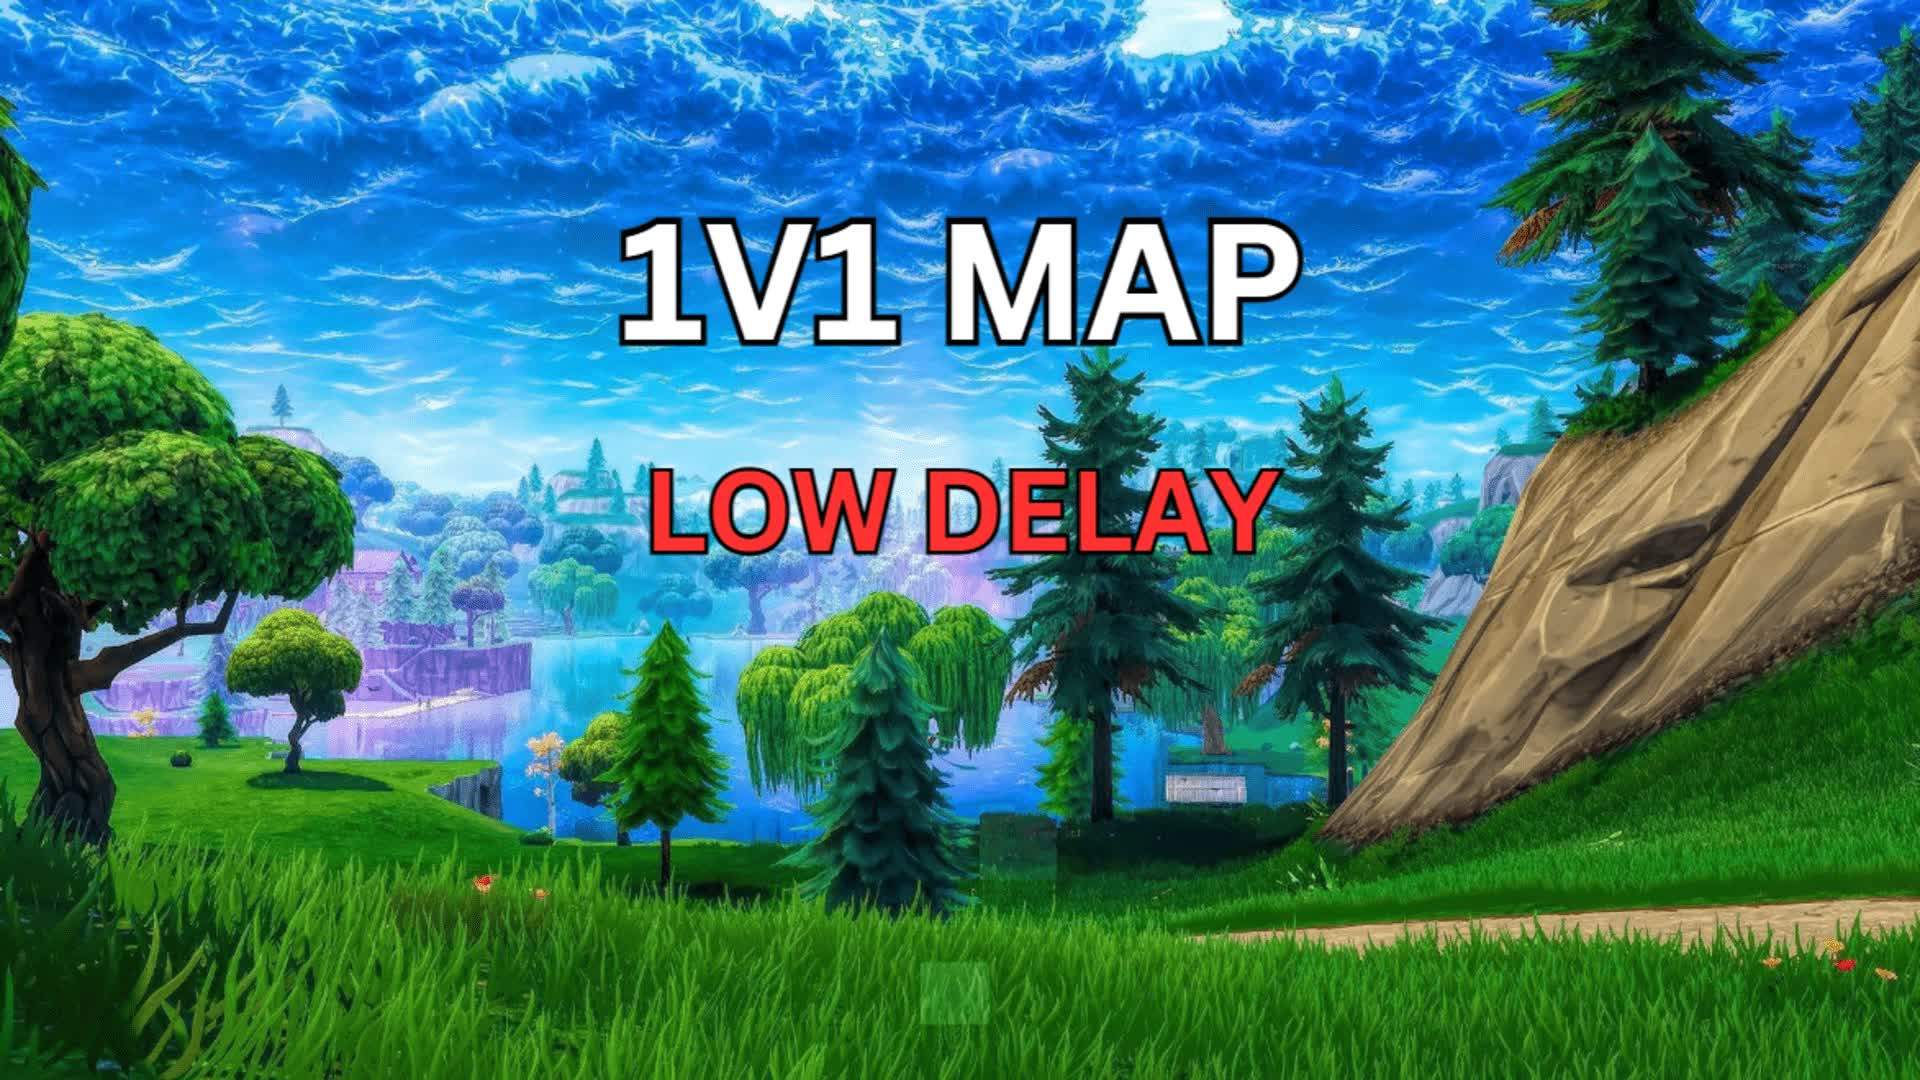 Low ping & delay 1v1 map